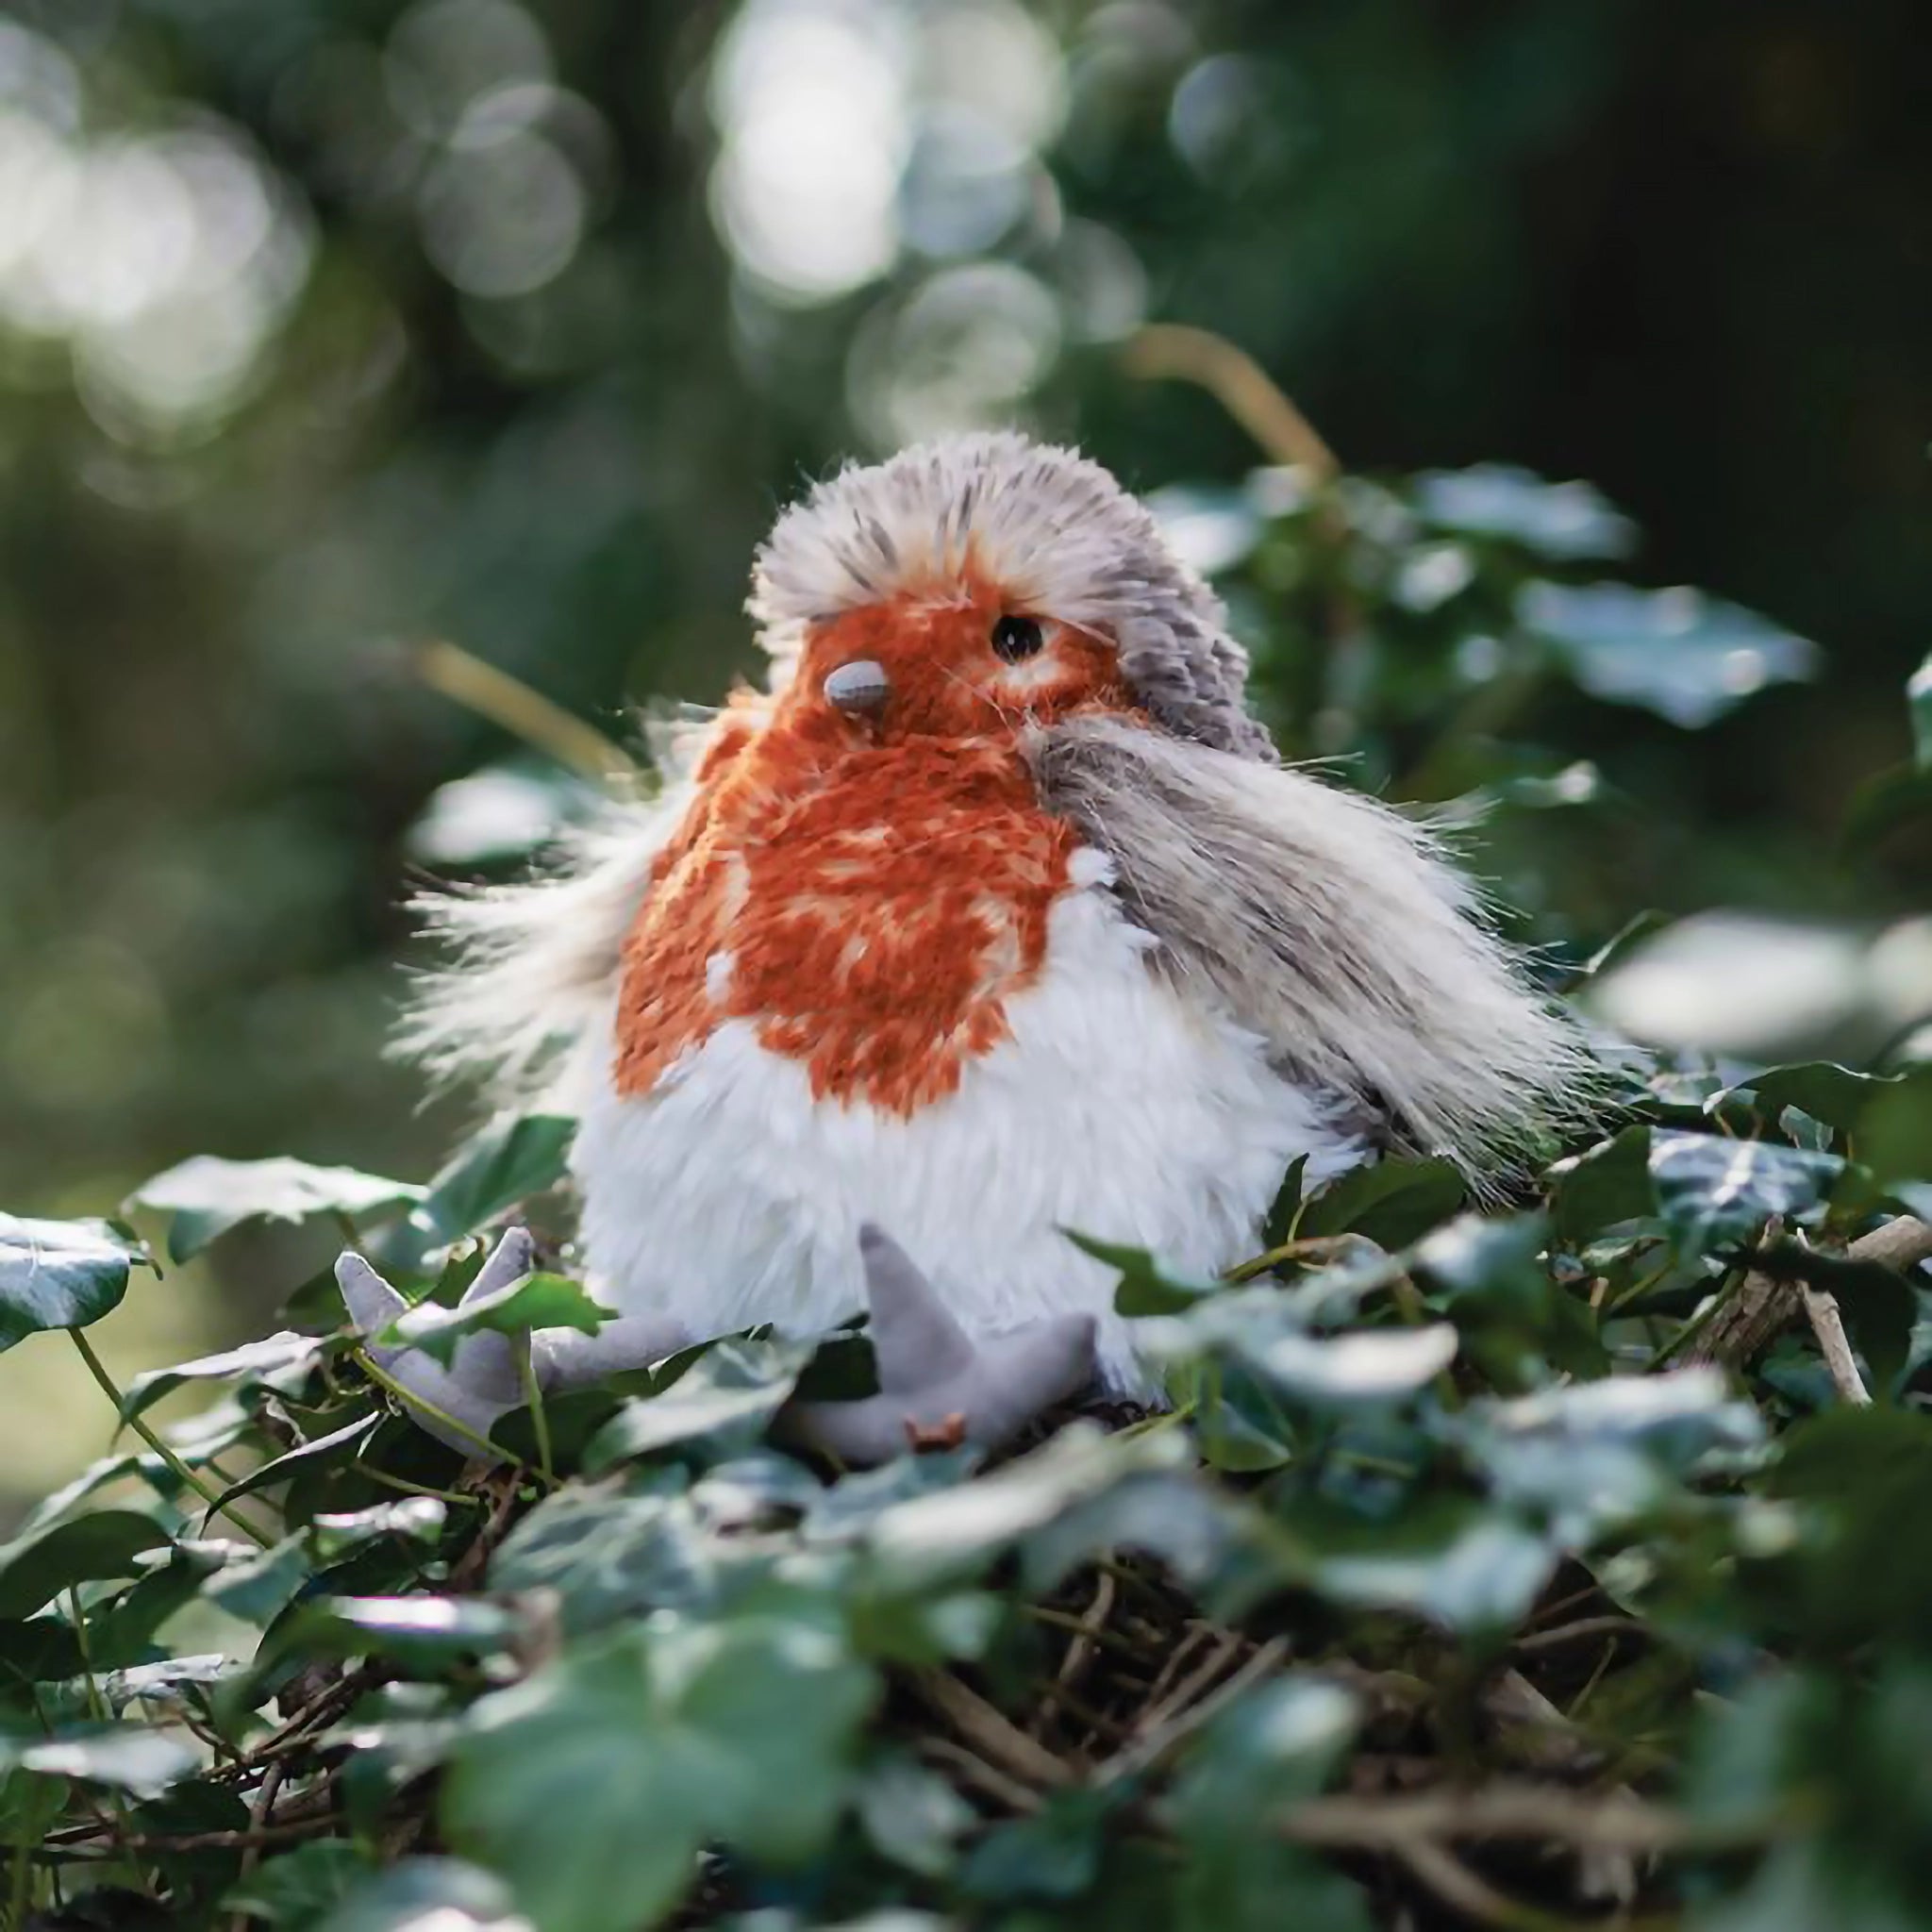 A stuffed robin bird plush toy with the Wrendale logo embroidered on the bottom of its foot posed in ivy